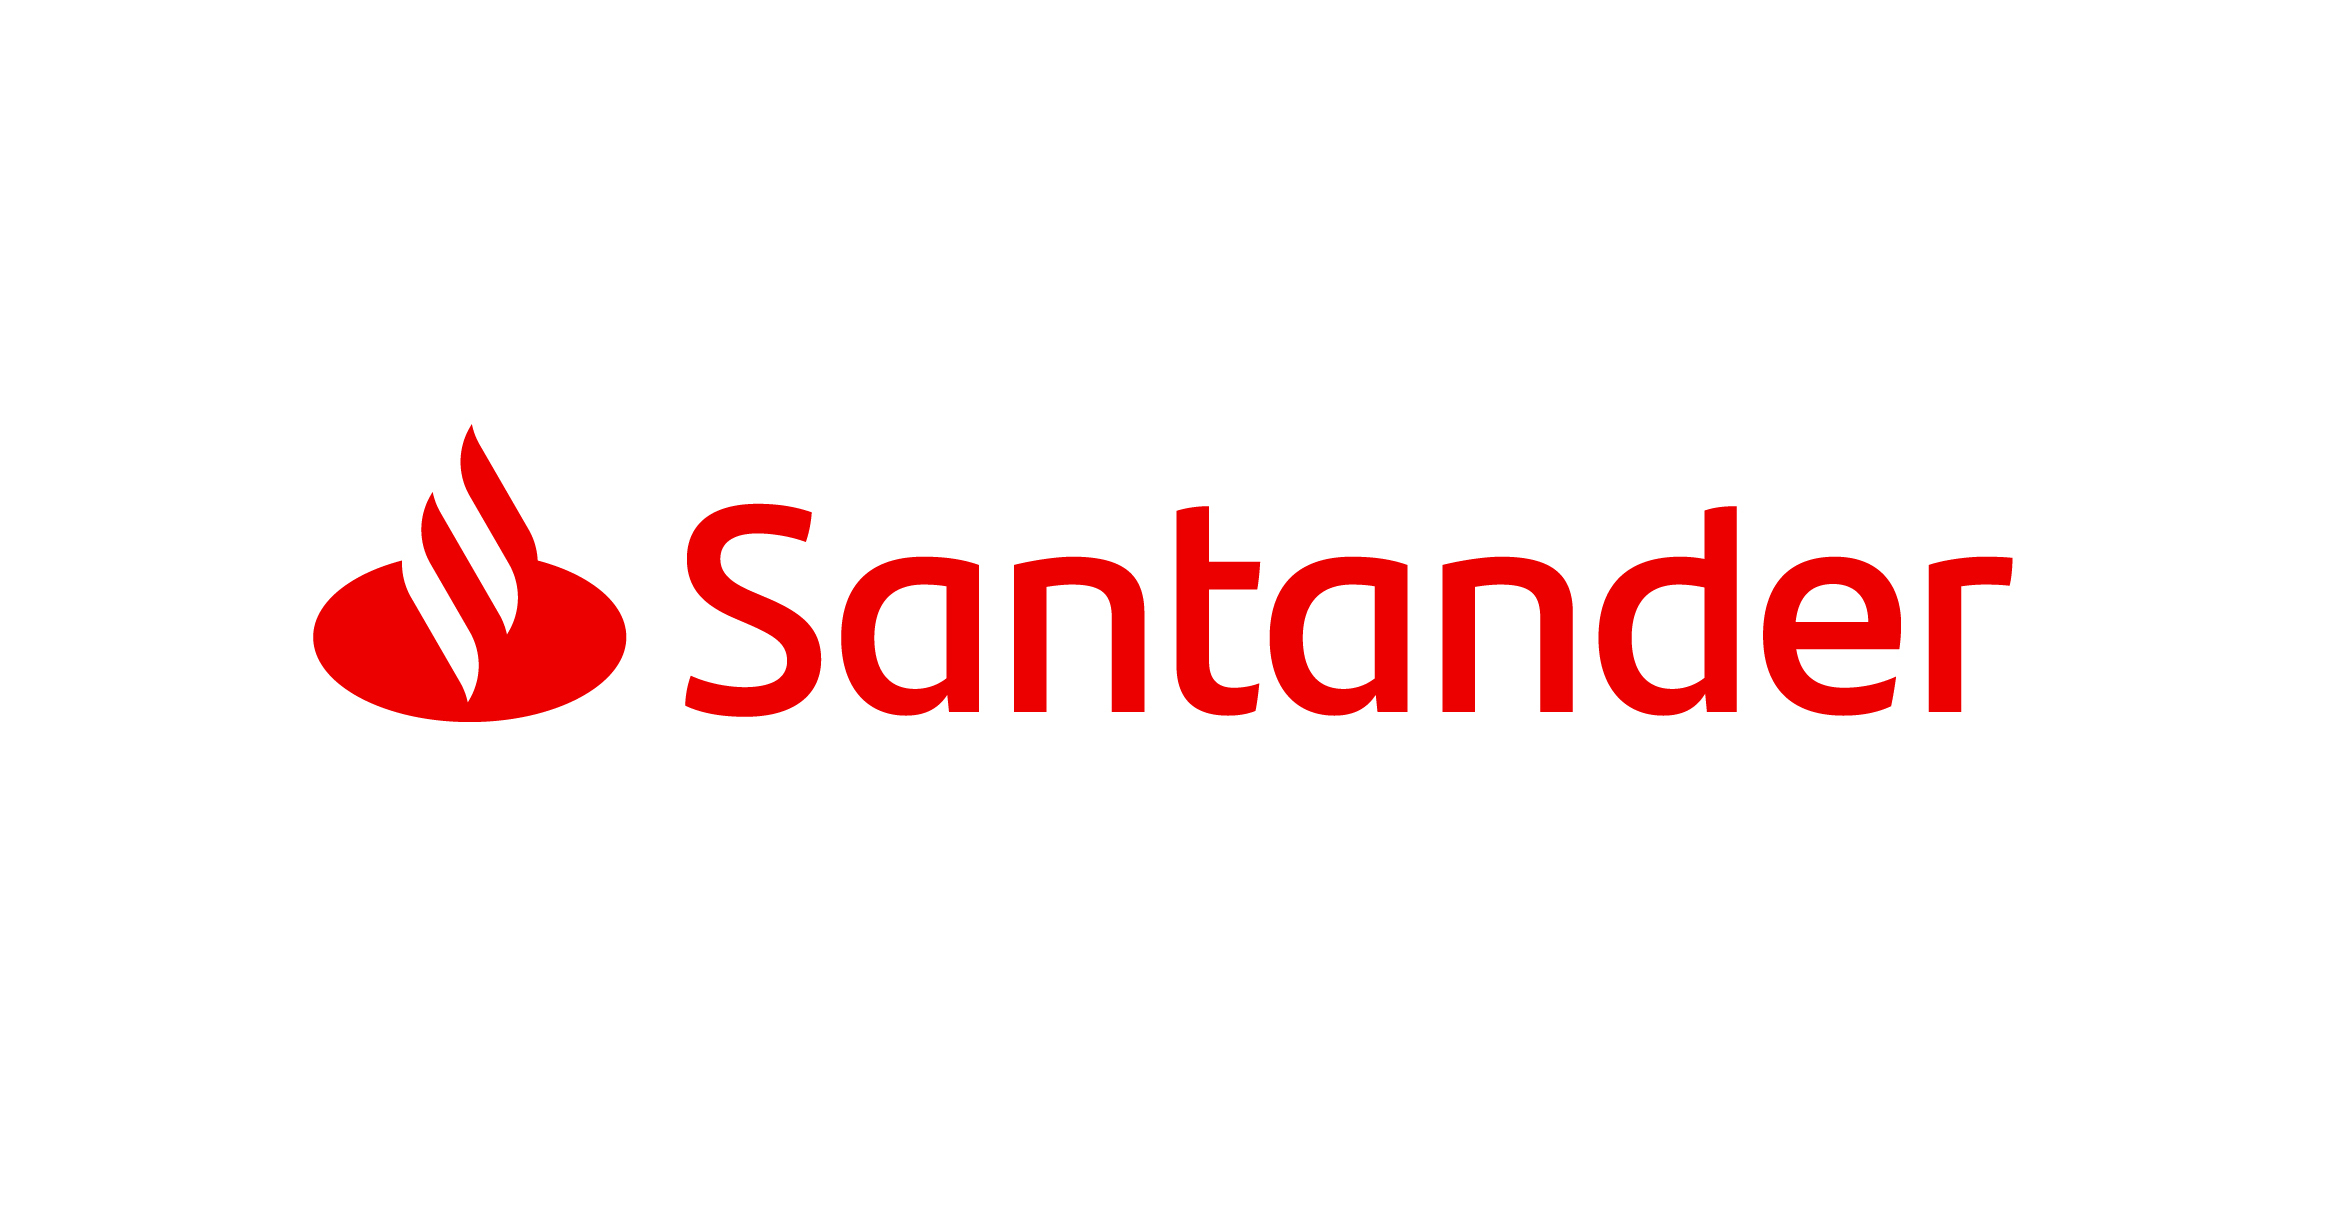 Santander Credit Card - See How to Apply Online for an Everyday Card